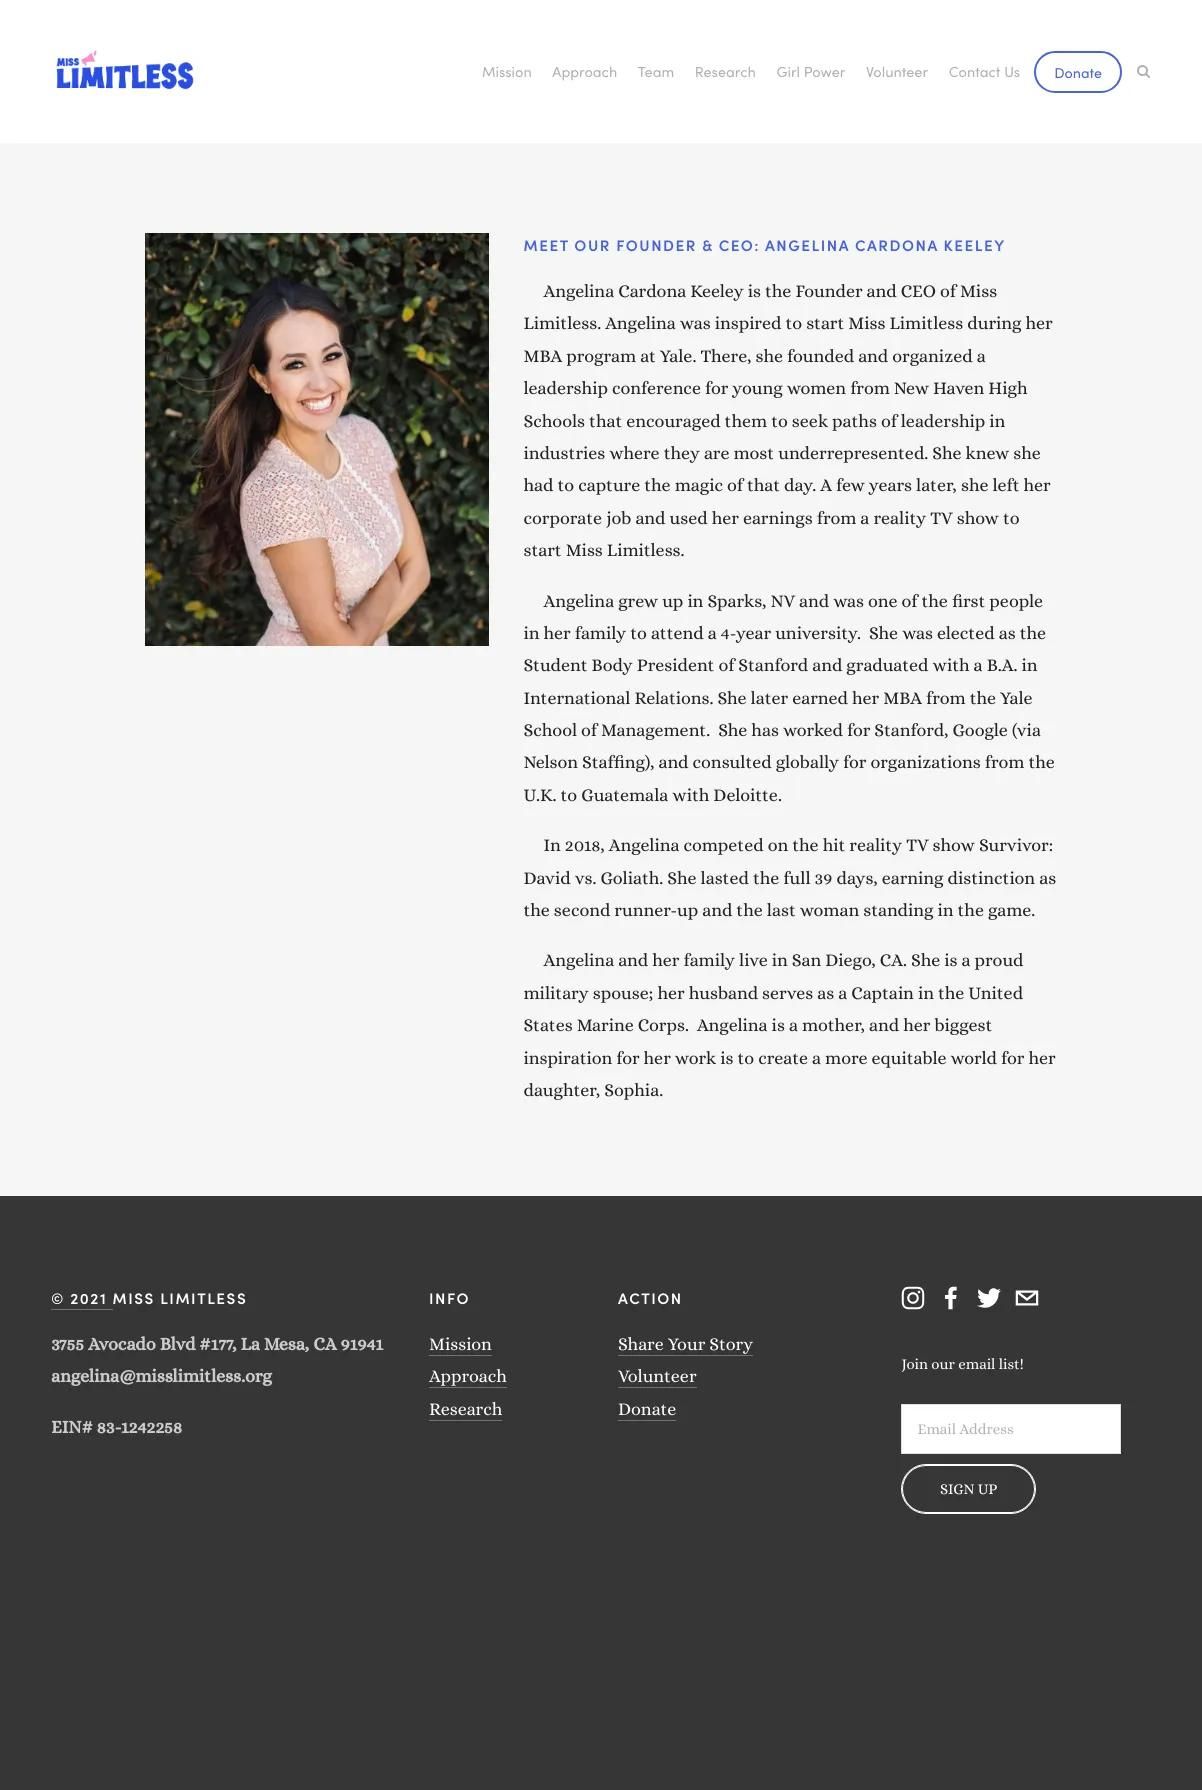 Screenshot 3 of Miss Limitless (Example Squarespace Nonprofit Website)